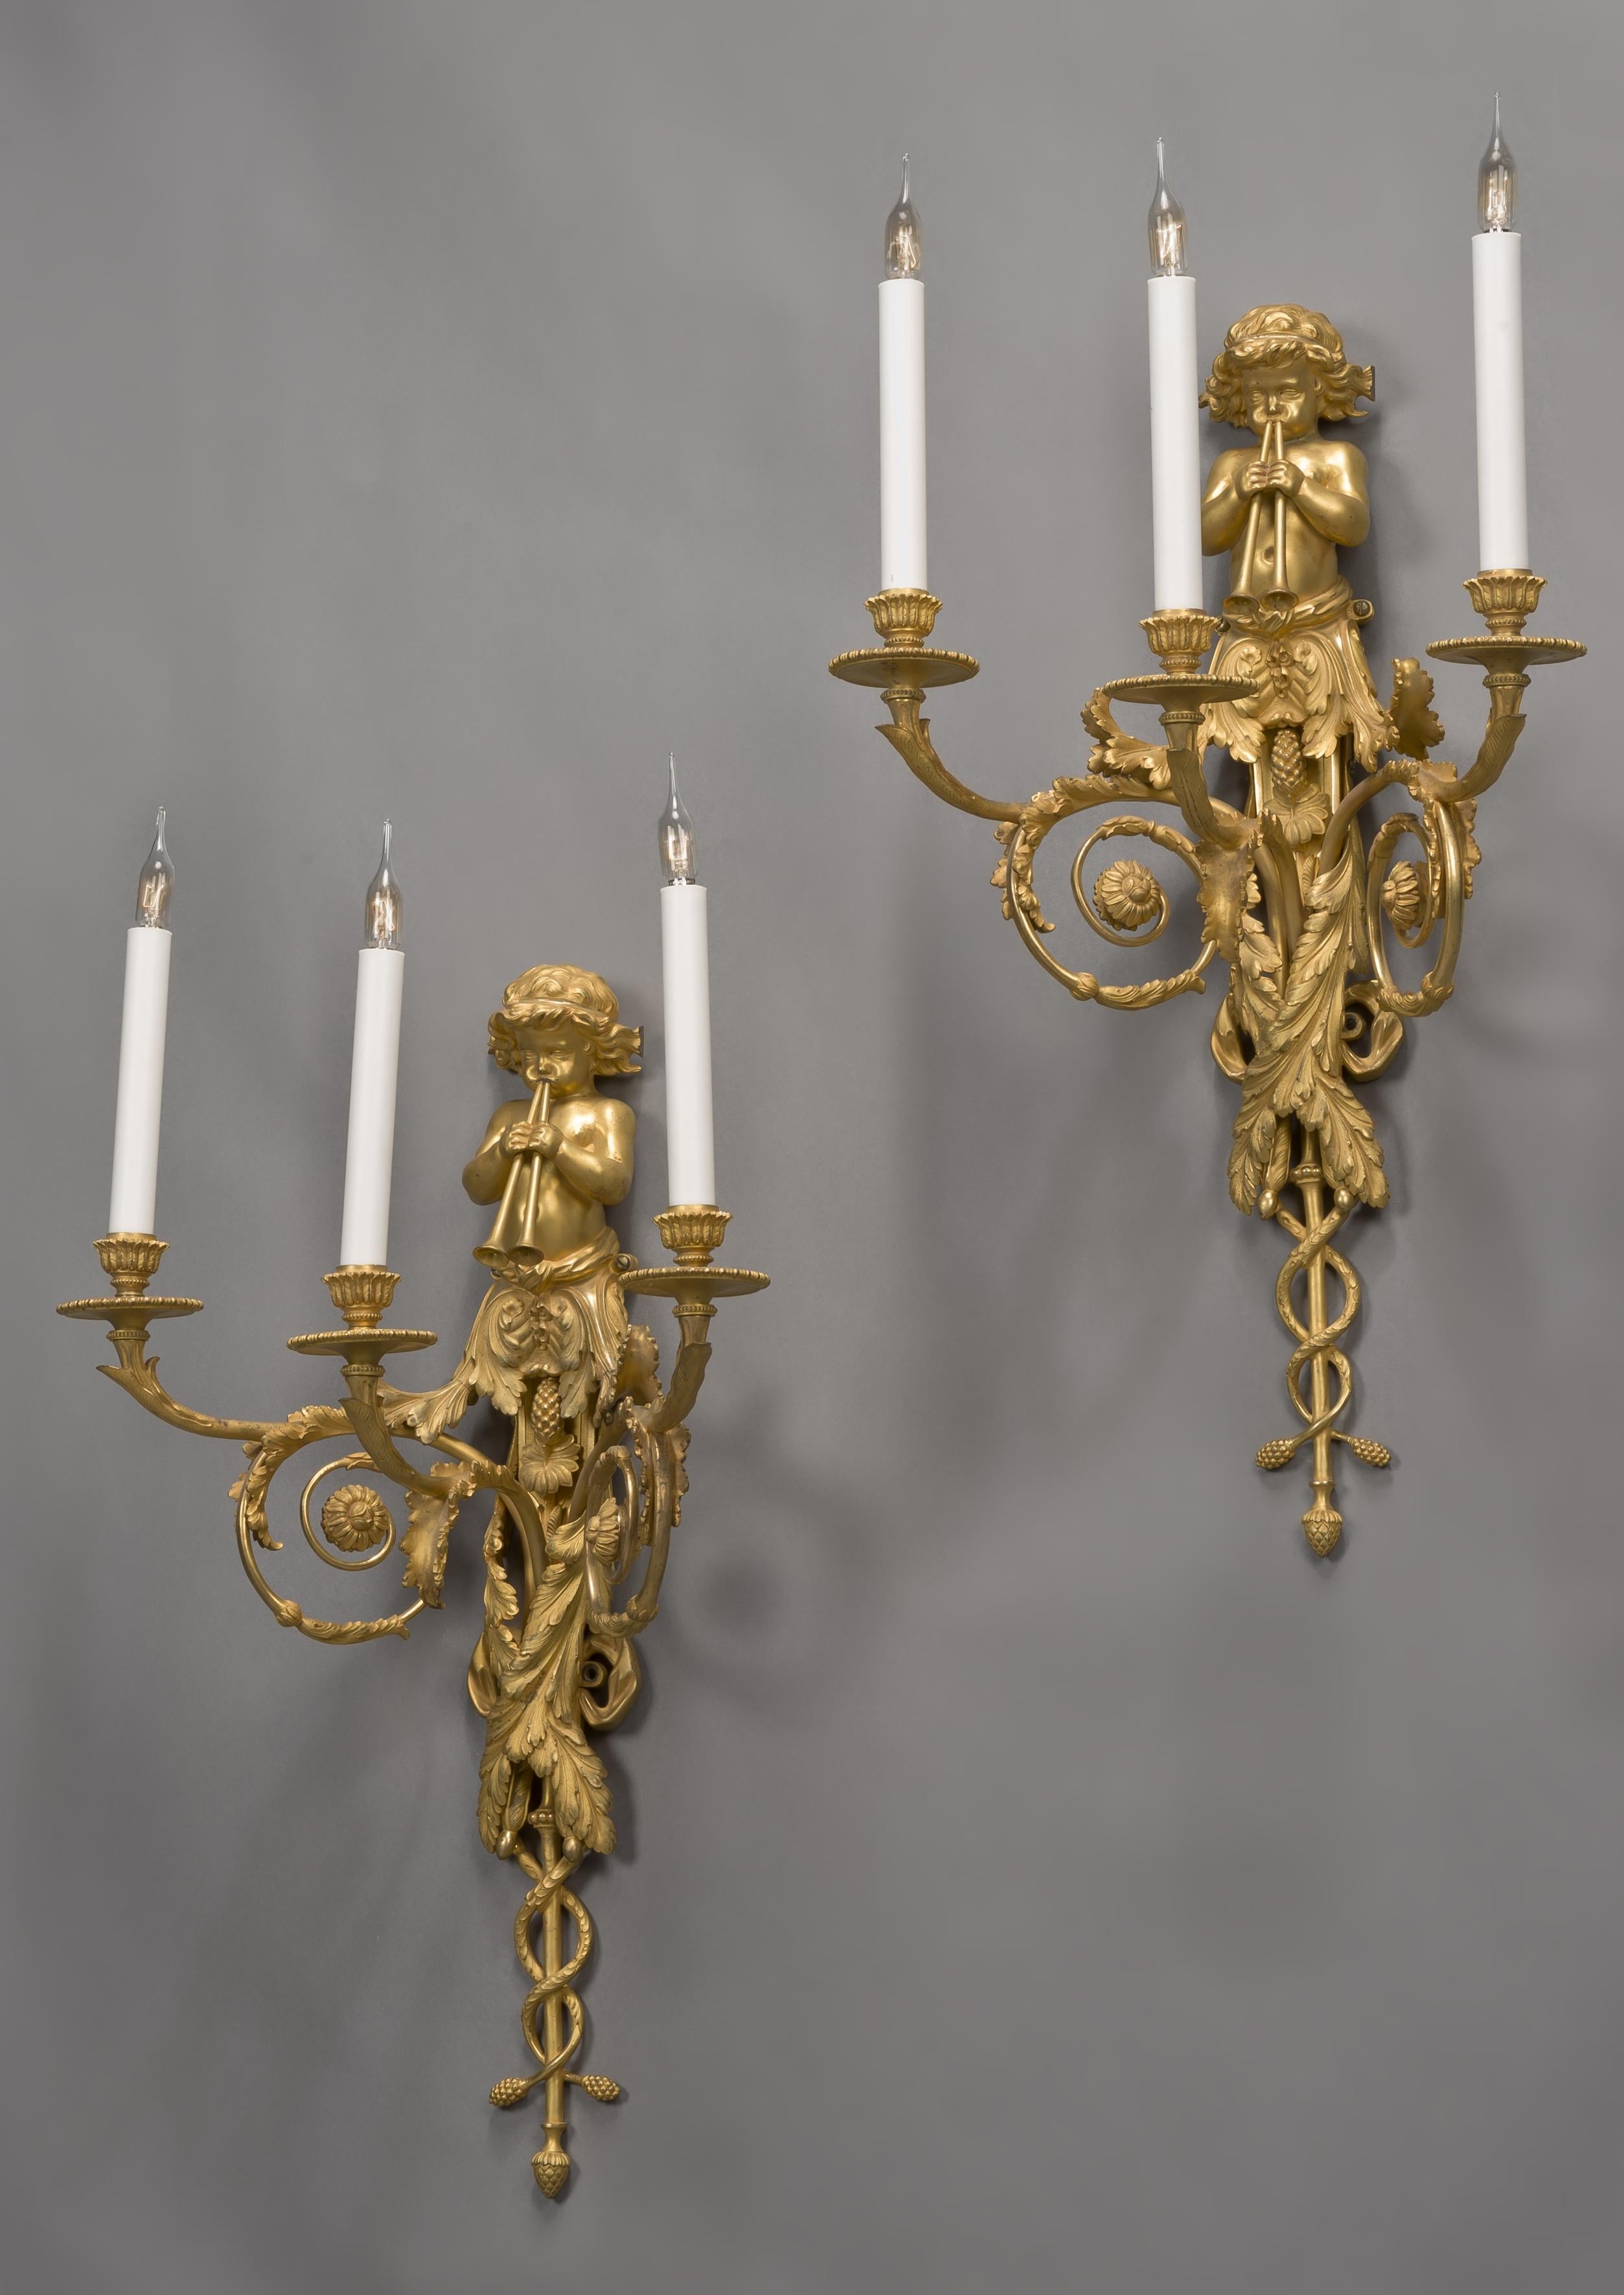 A fine pair of Louis XVI style gilt bronze three-light wall-appliques after a Design by Jean Hauré for the Château de St. Cloud.

French, circa 1890. 

Each applique has a backplate issuing three scrolling acanthus candle arms terminating in